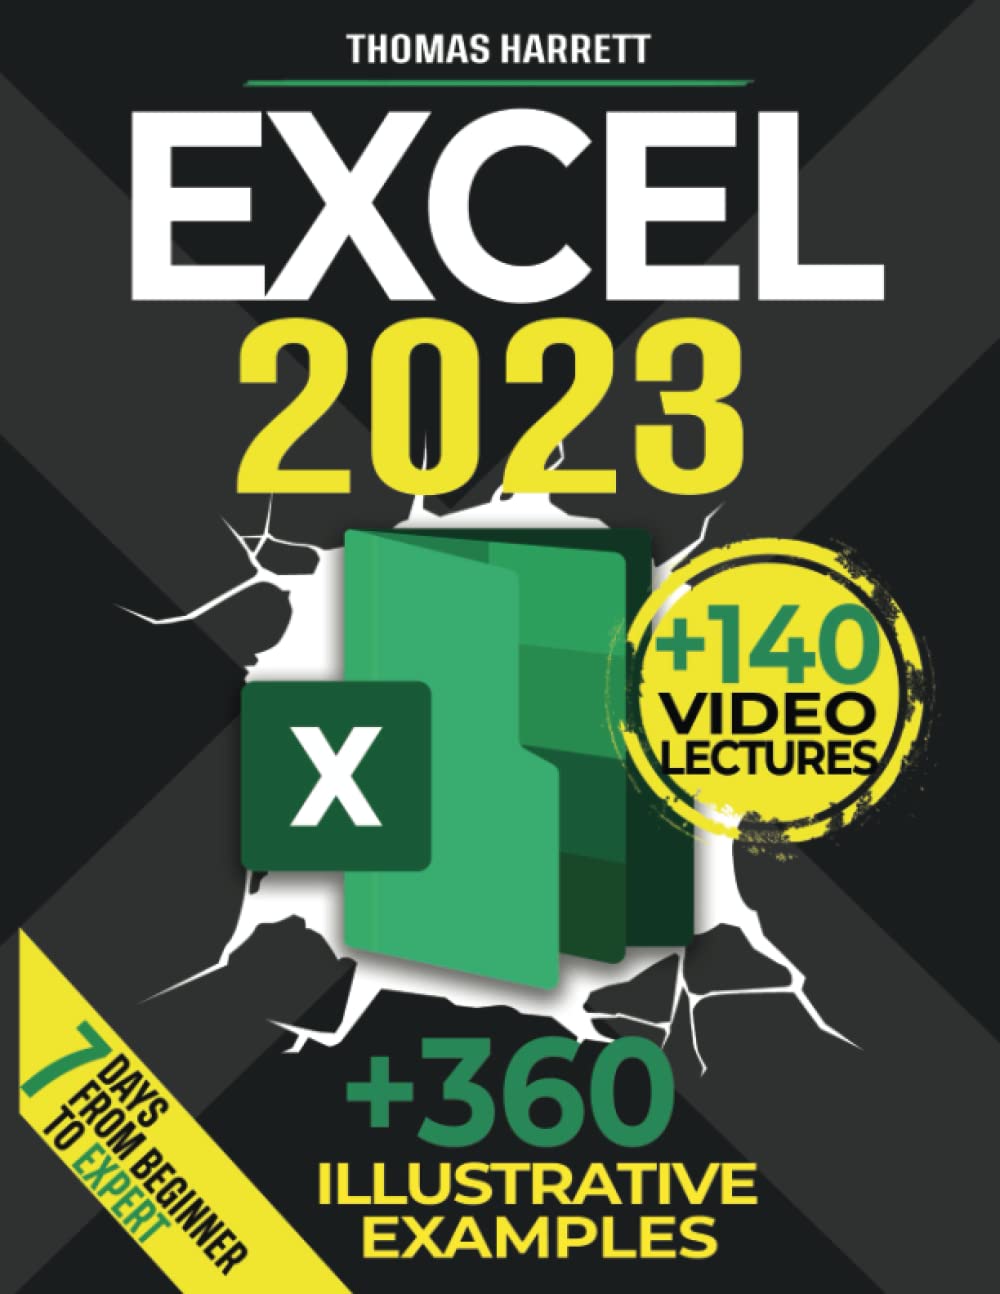 EXCEL: The Complete and Practical Guide to Become a True Excel Master in 7 Days, From Beginner to Expert | +360 Illustrative Examples, Charts, Formulas, Step-by-Step Tutorials, Tips & Tricks